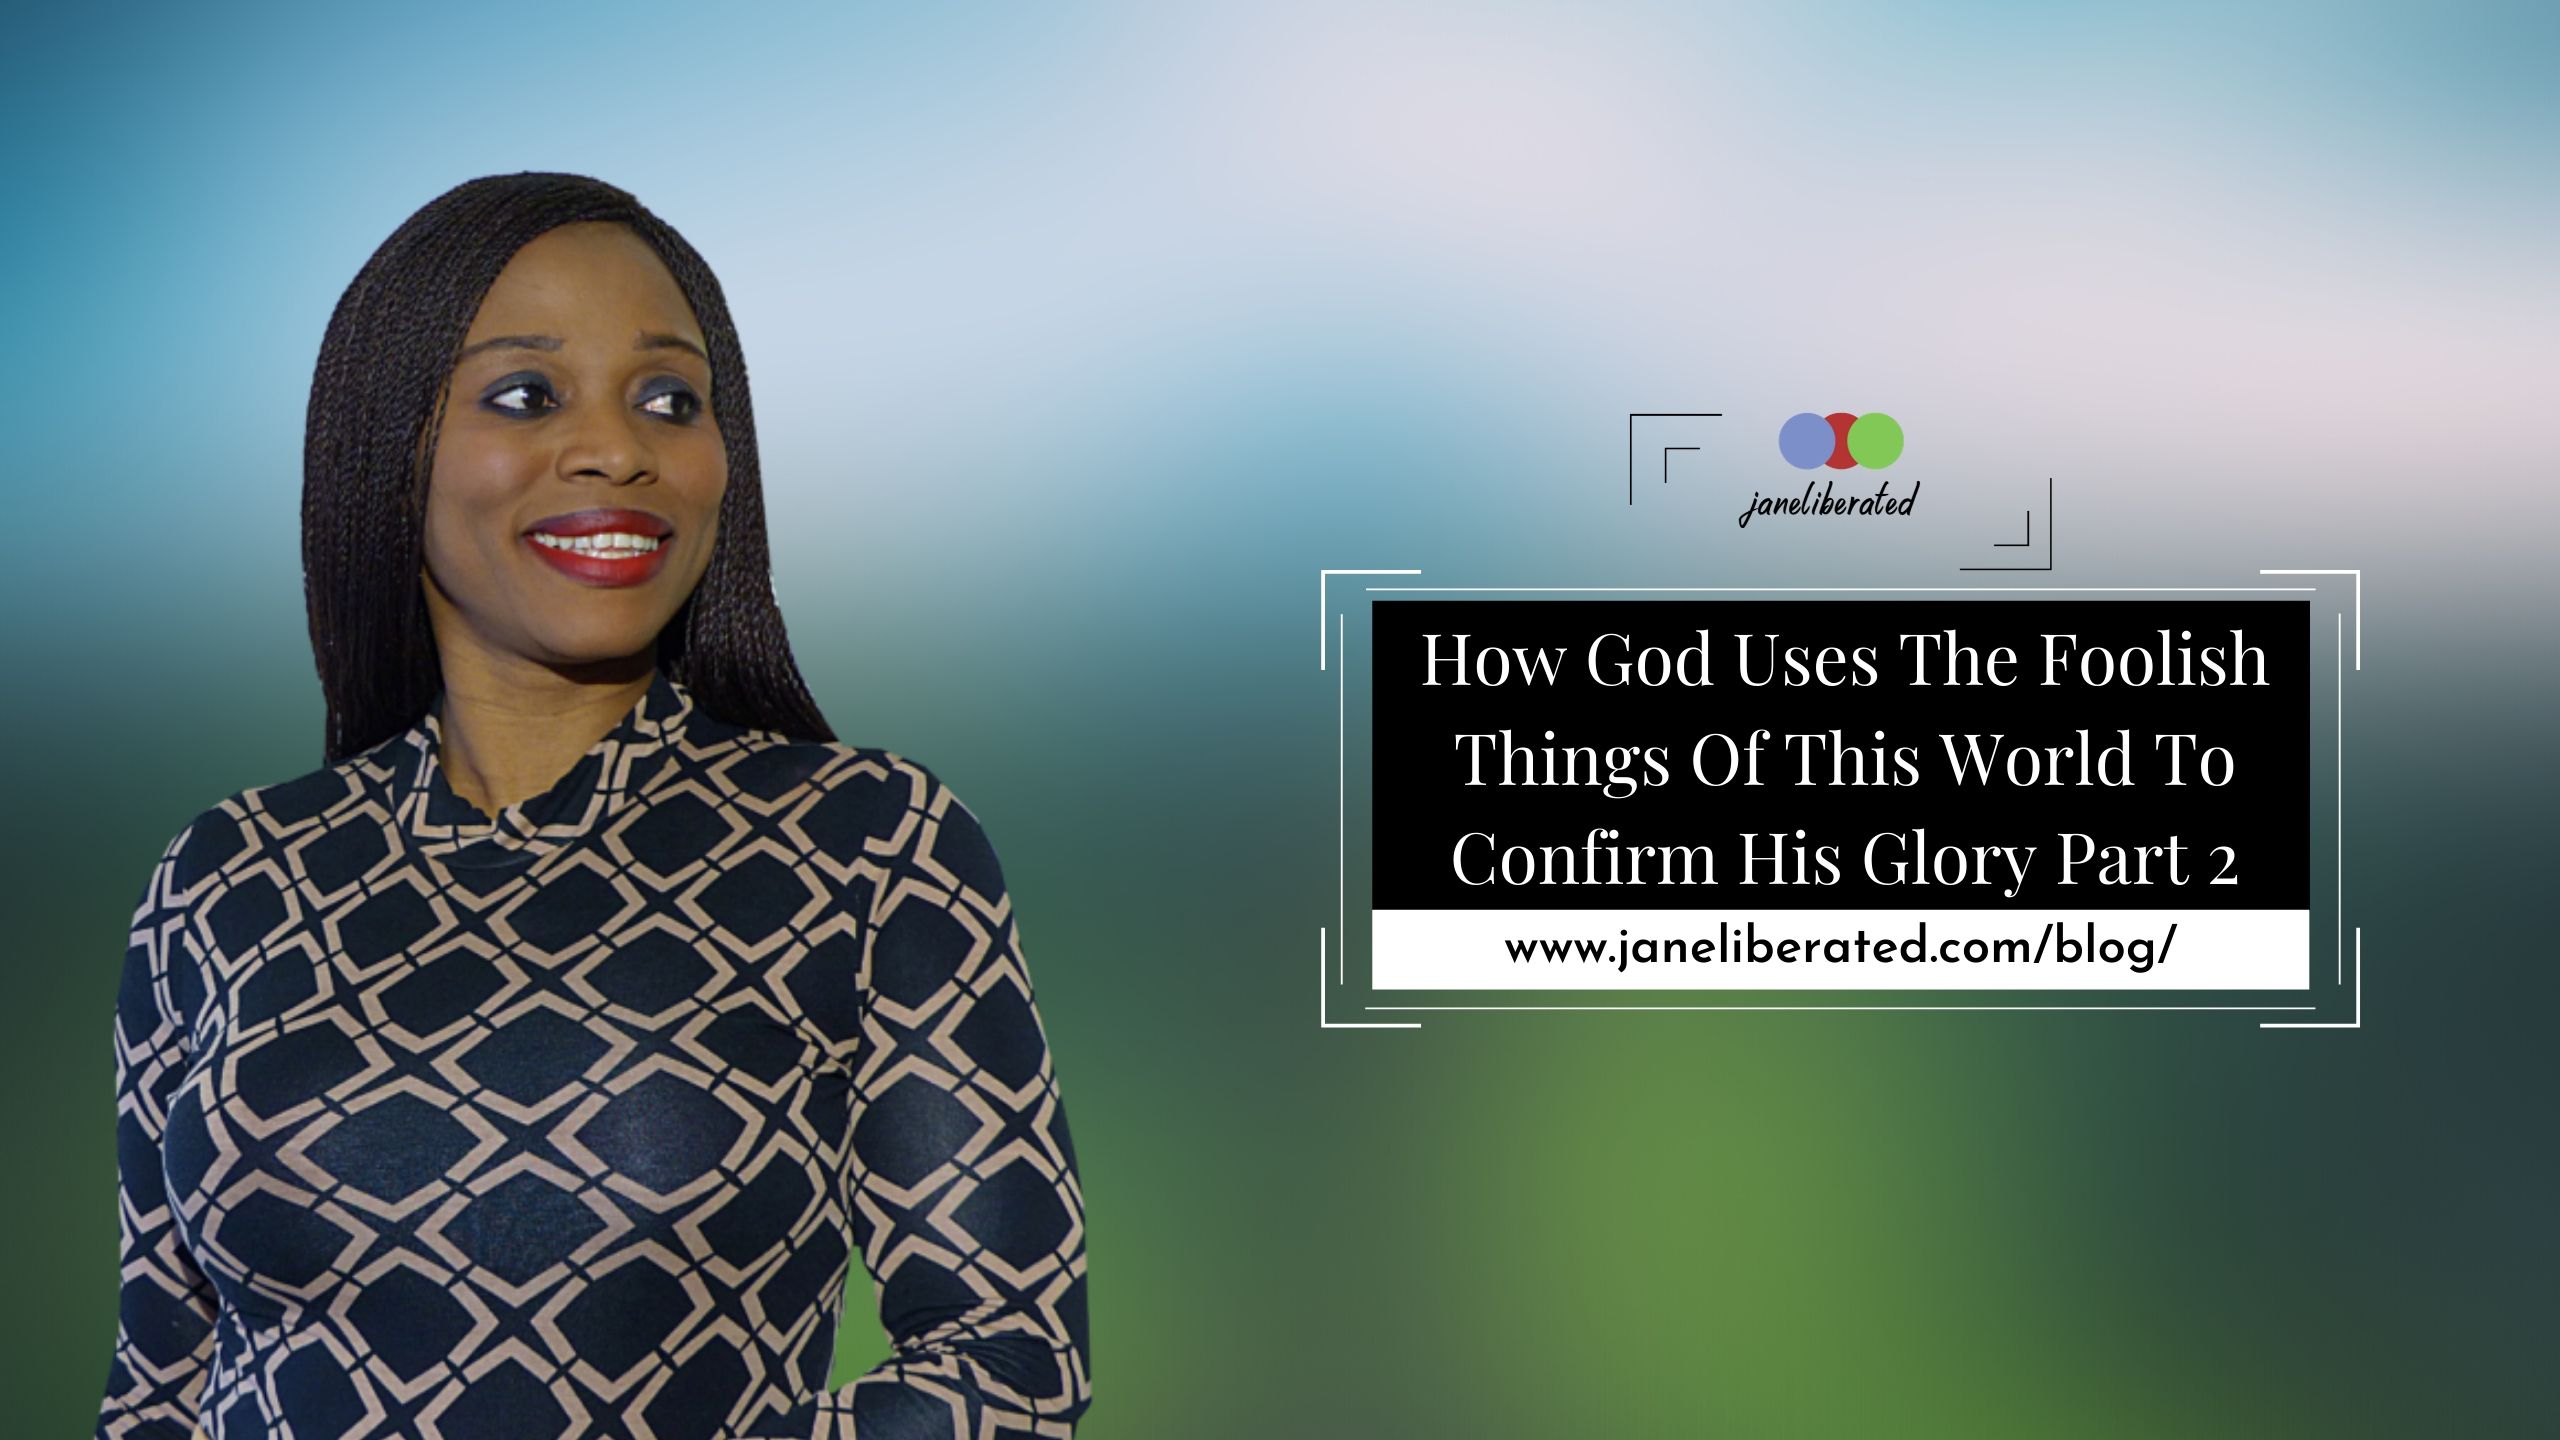 How God Uses The Foolish Things Of This World To Confirm His Glory Part 2